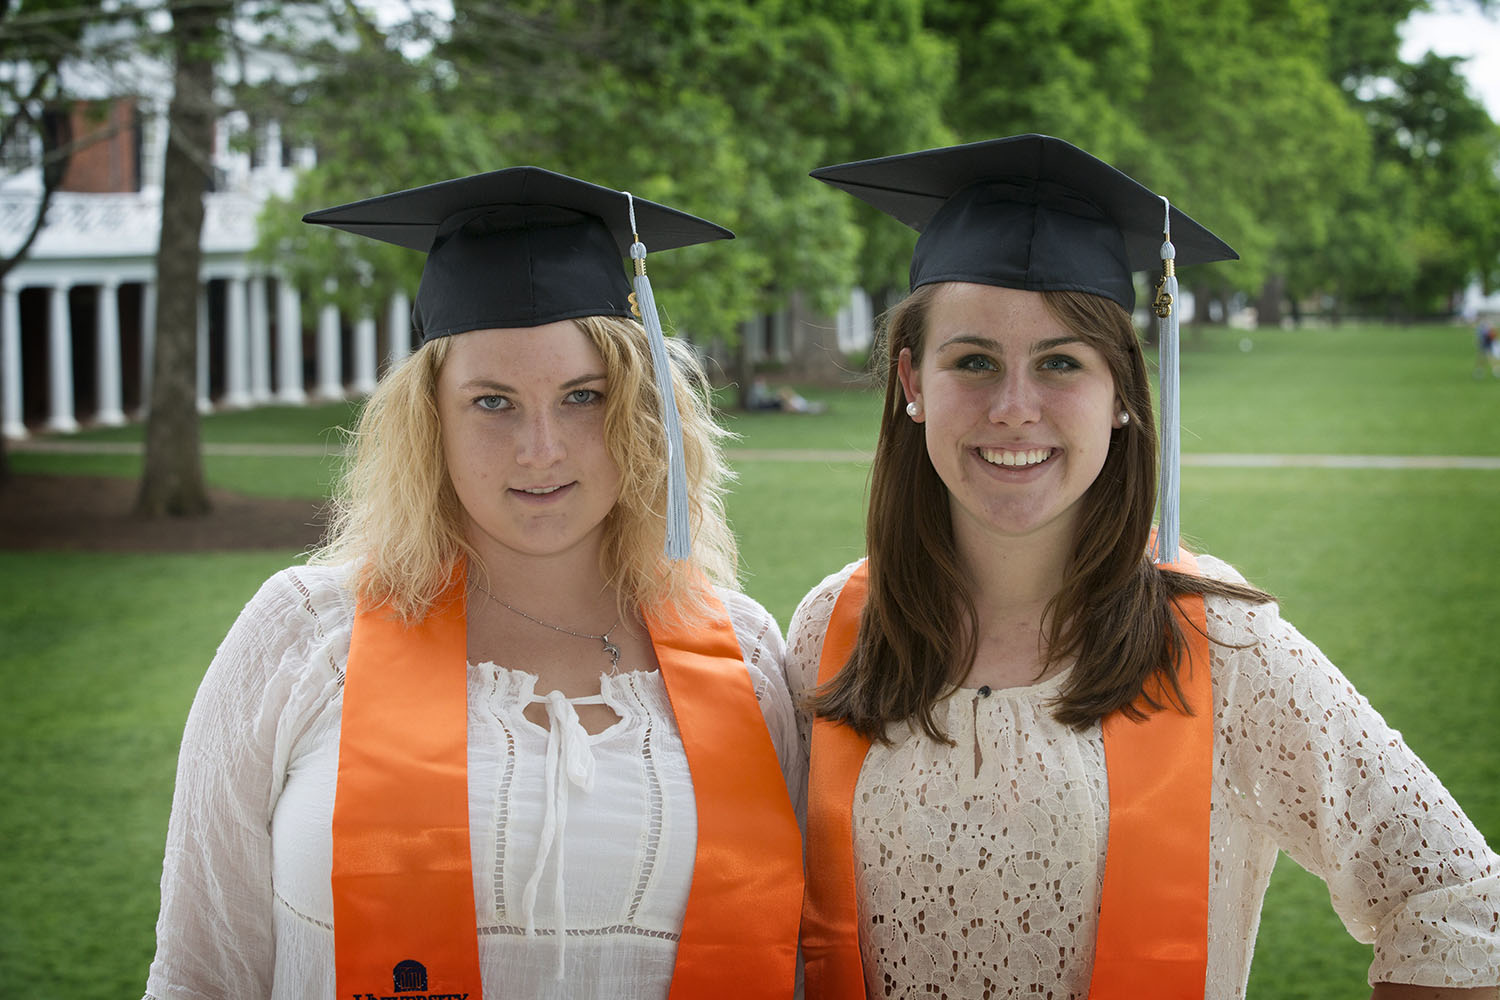 Kasey Blevins, left, and Emily Riedel, right, wears black graduation caps smiling at the camera